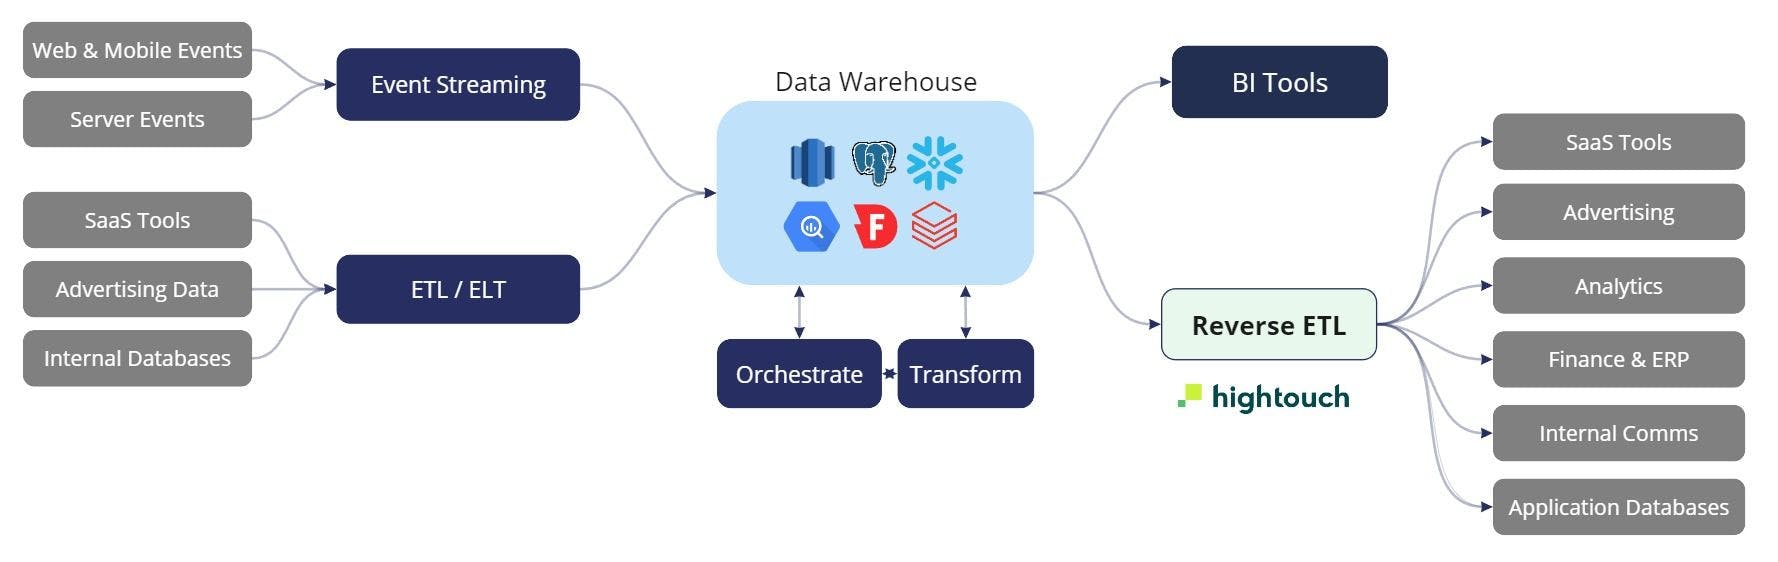 Where Reverse ETL fits into the Modern Data Stack